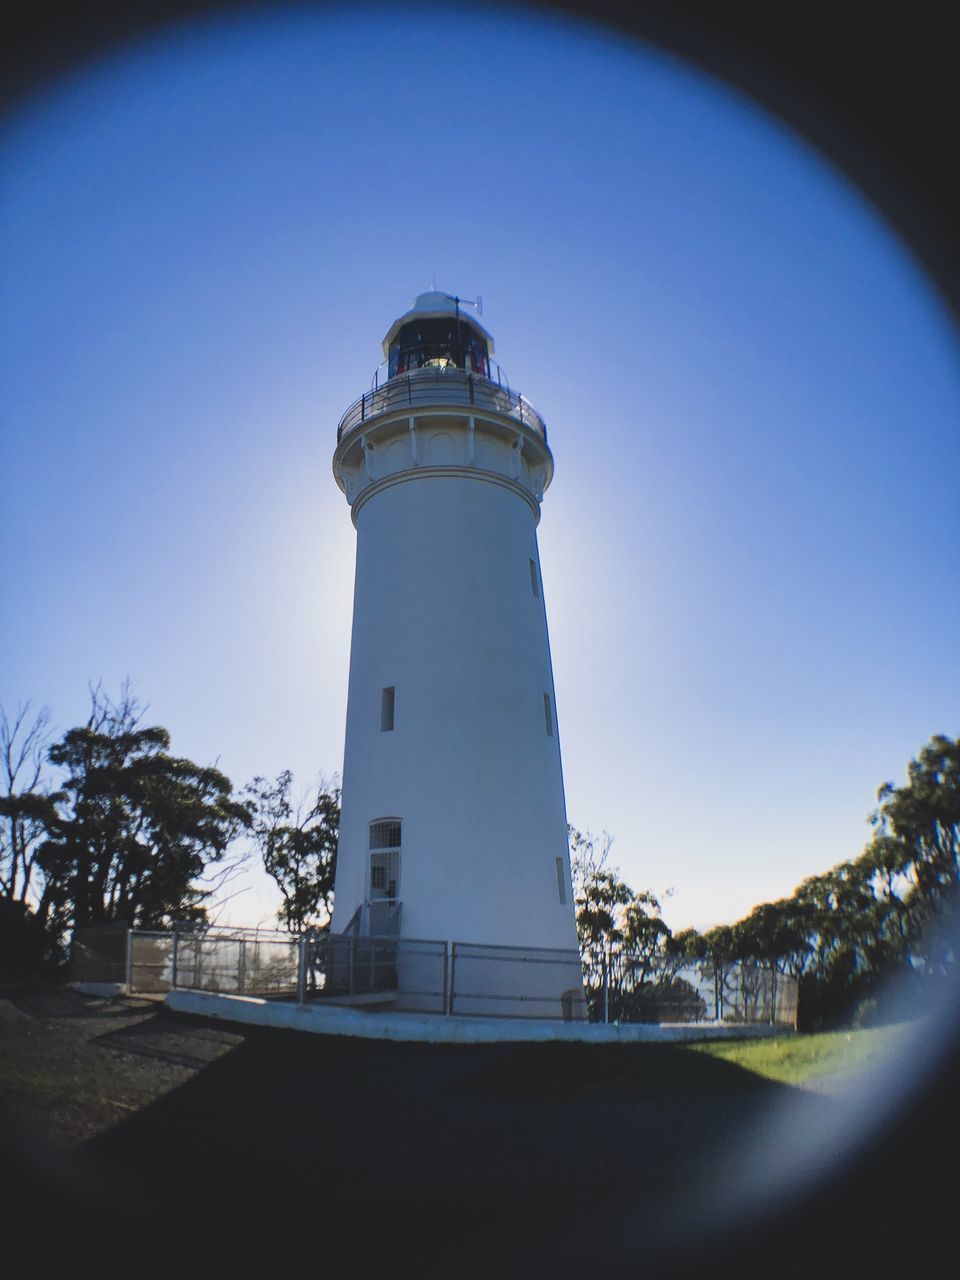 LOW ANGLE VIEW OF LIGHTHOUSE BY BUILDING AGAINST SKY